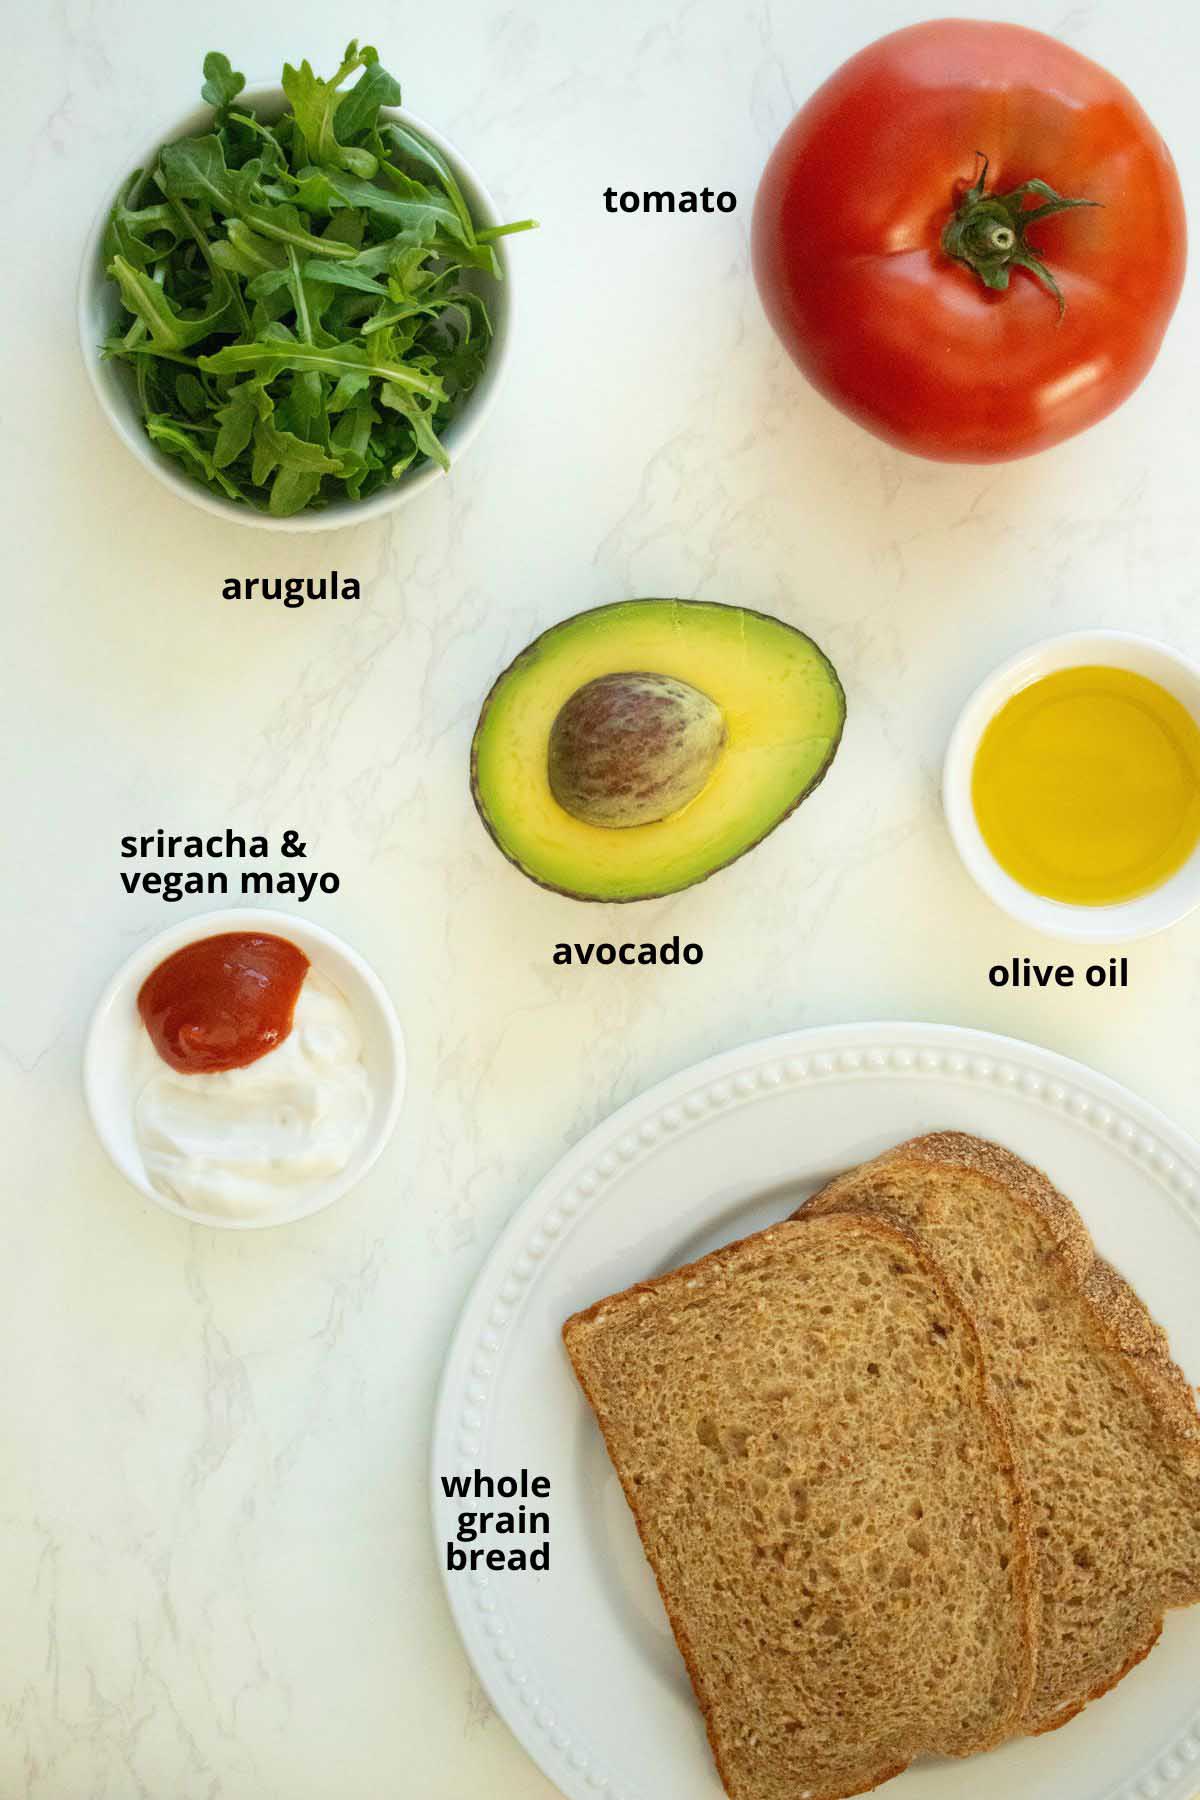 avocado, sriracha, mayo, bread, and other sandwich ingredients in bowls on a white table